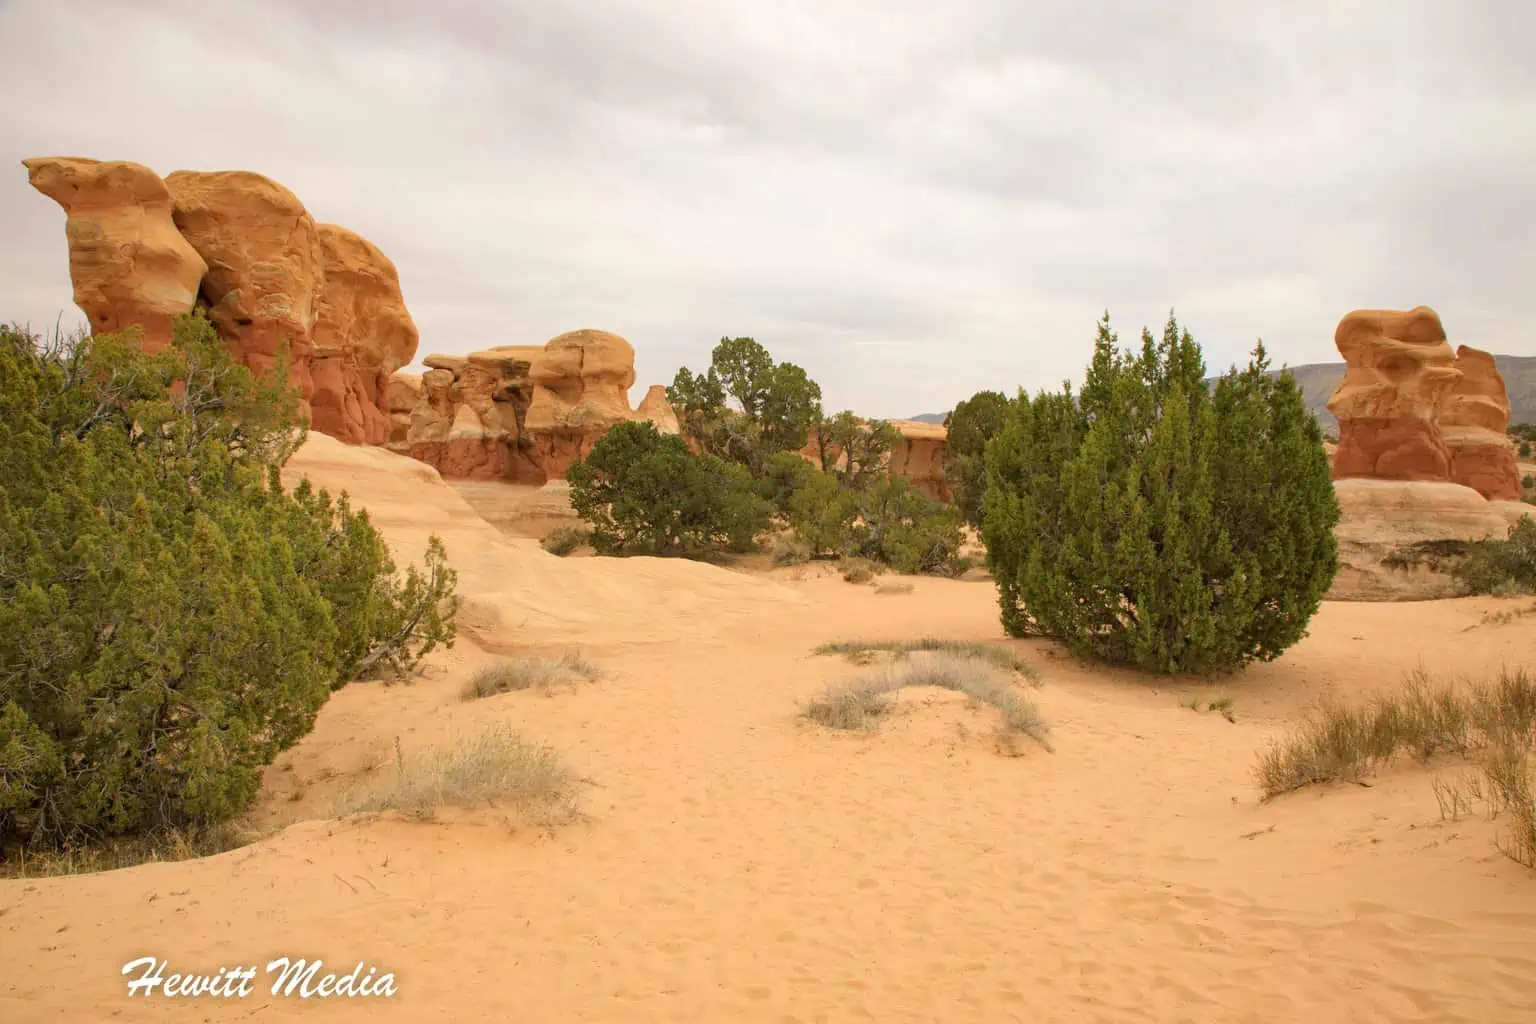 Visiting Devil's Garden in the Grand Staircase-Escalante National Monument